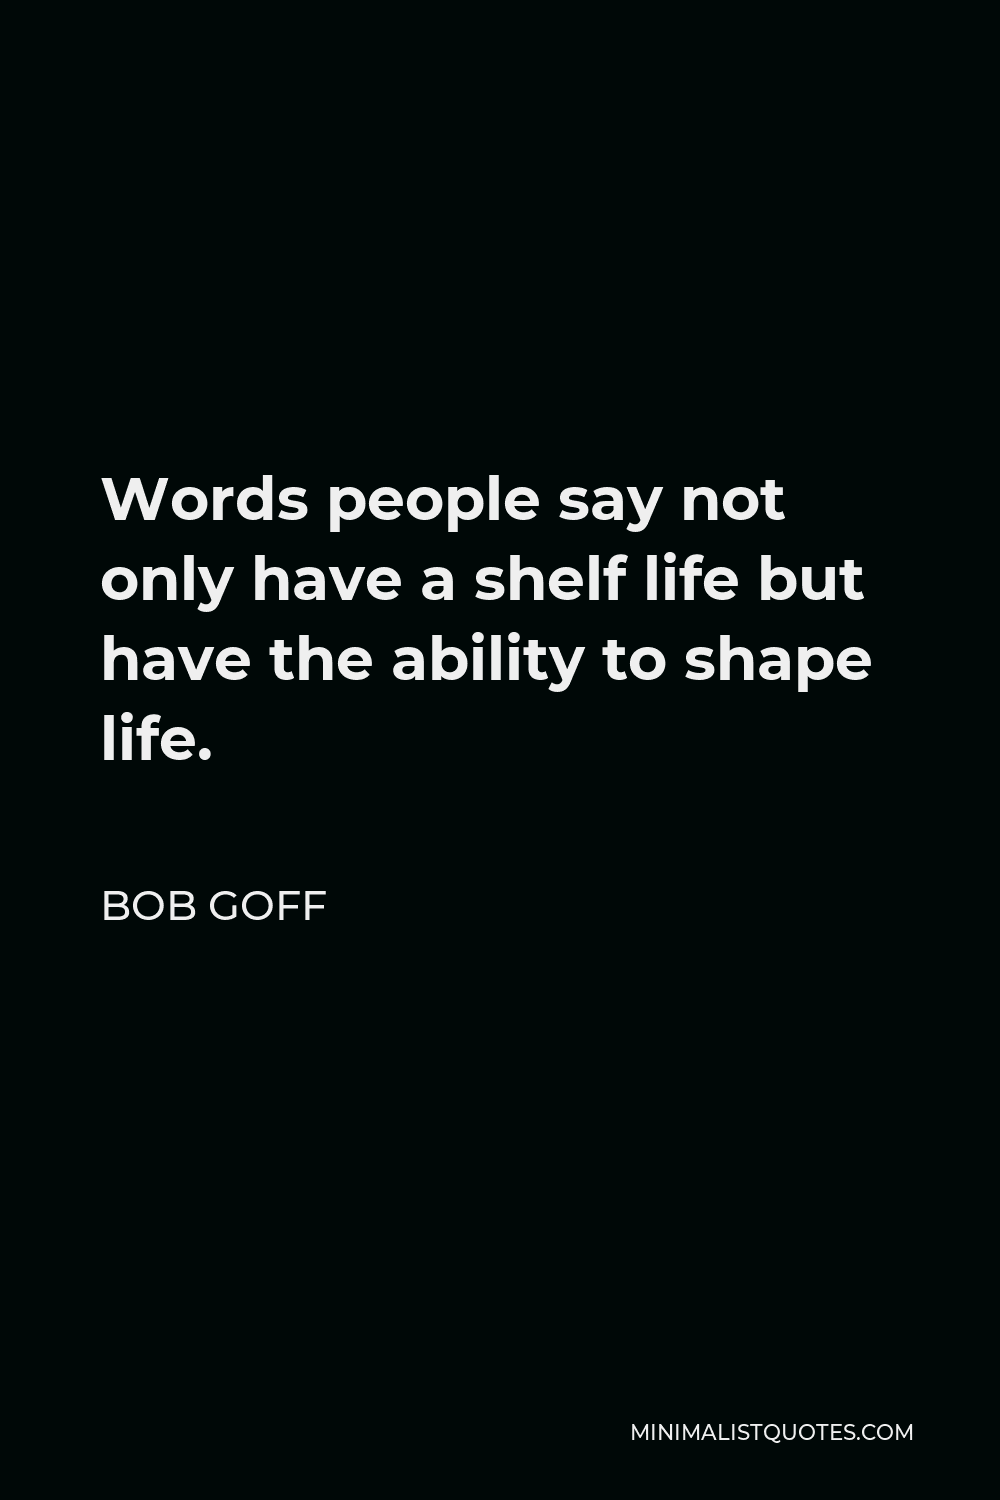 Bob Goff Quote - Words people say not only have a shelf life but have the ability to shape life.